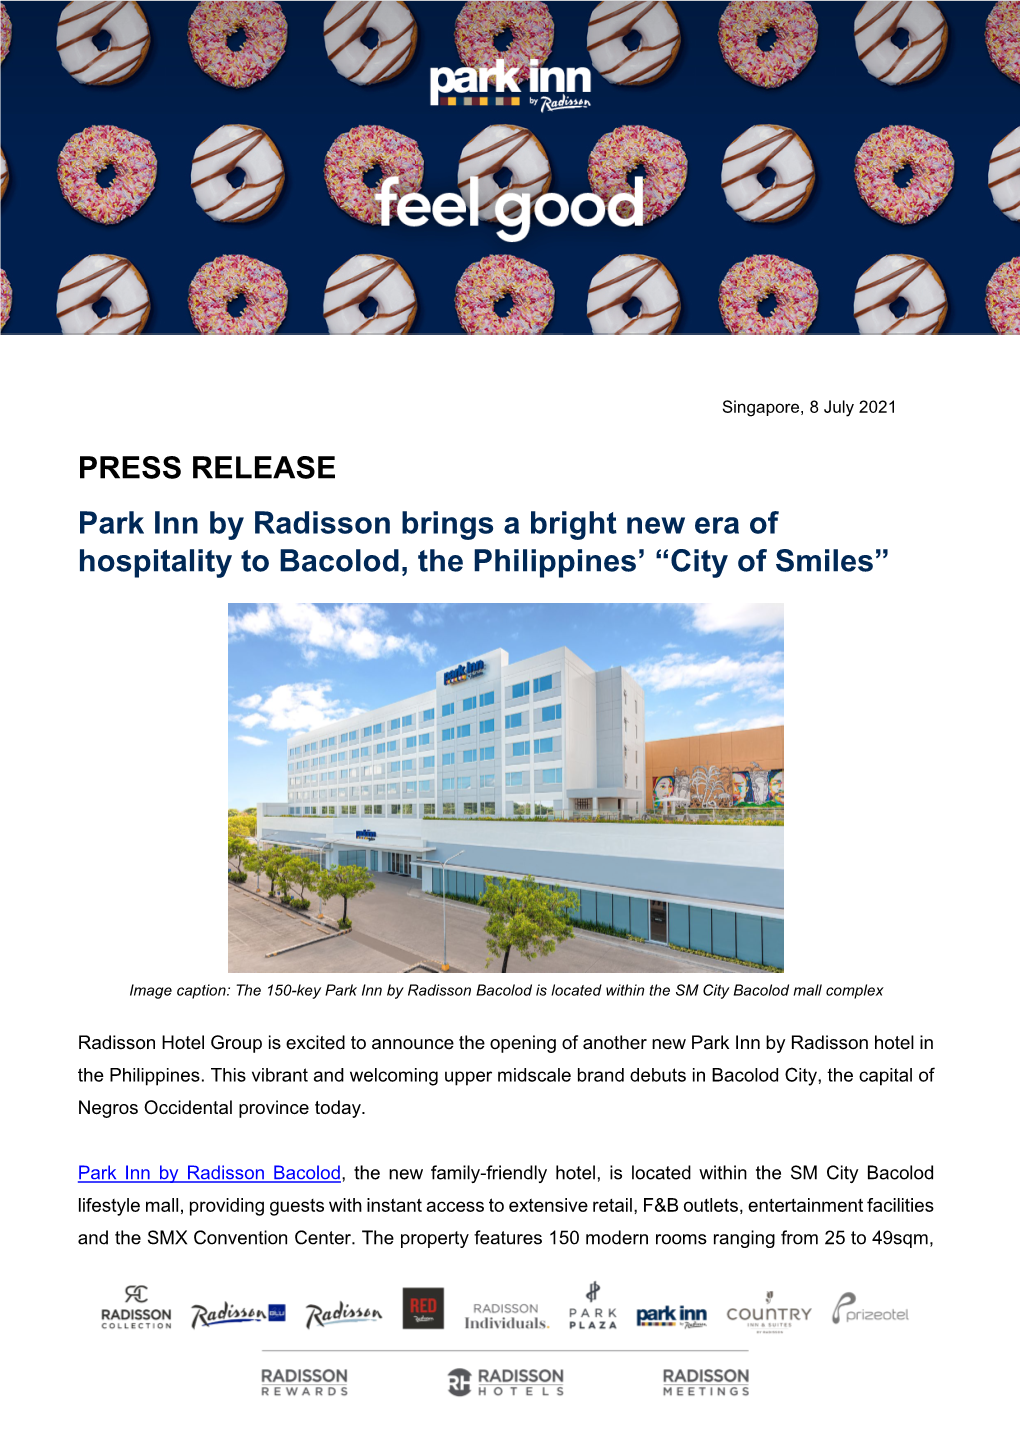 PRESS RELEASE Park Inn by Radisson Brings a Bright New Era of Hospitality to Bacolod, the Philippines' “City of Smiles”